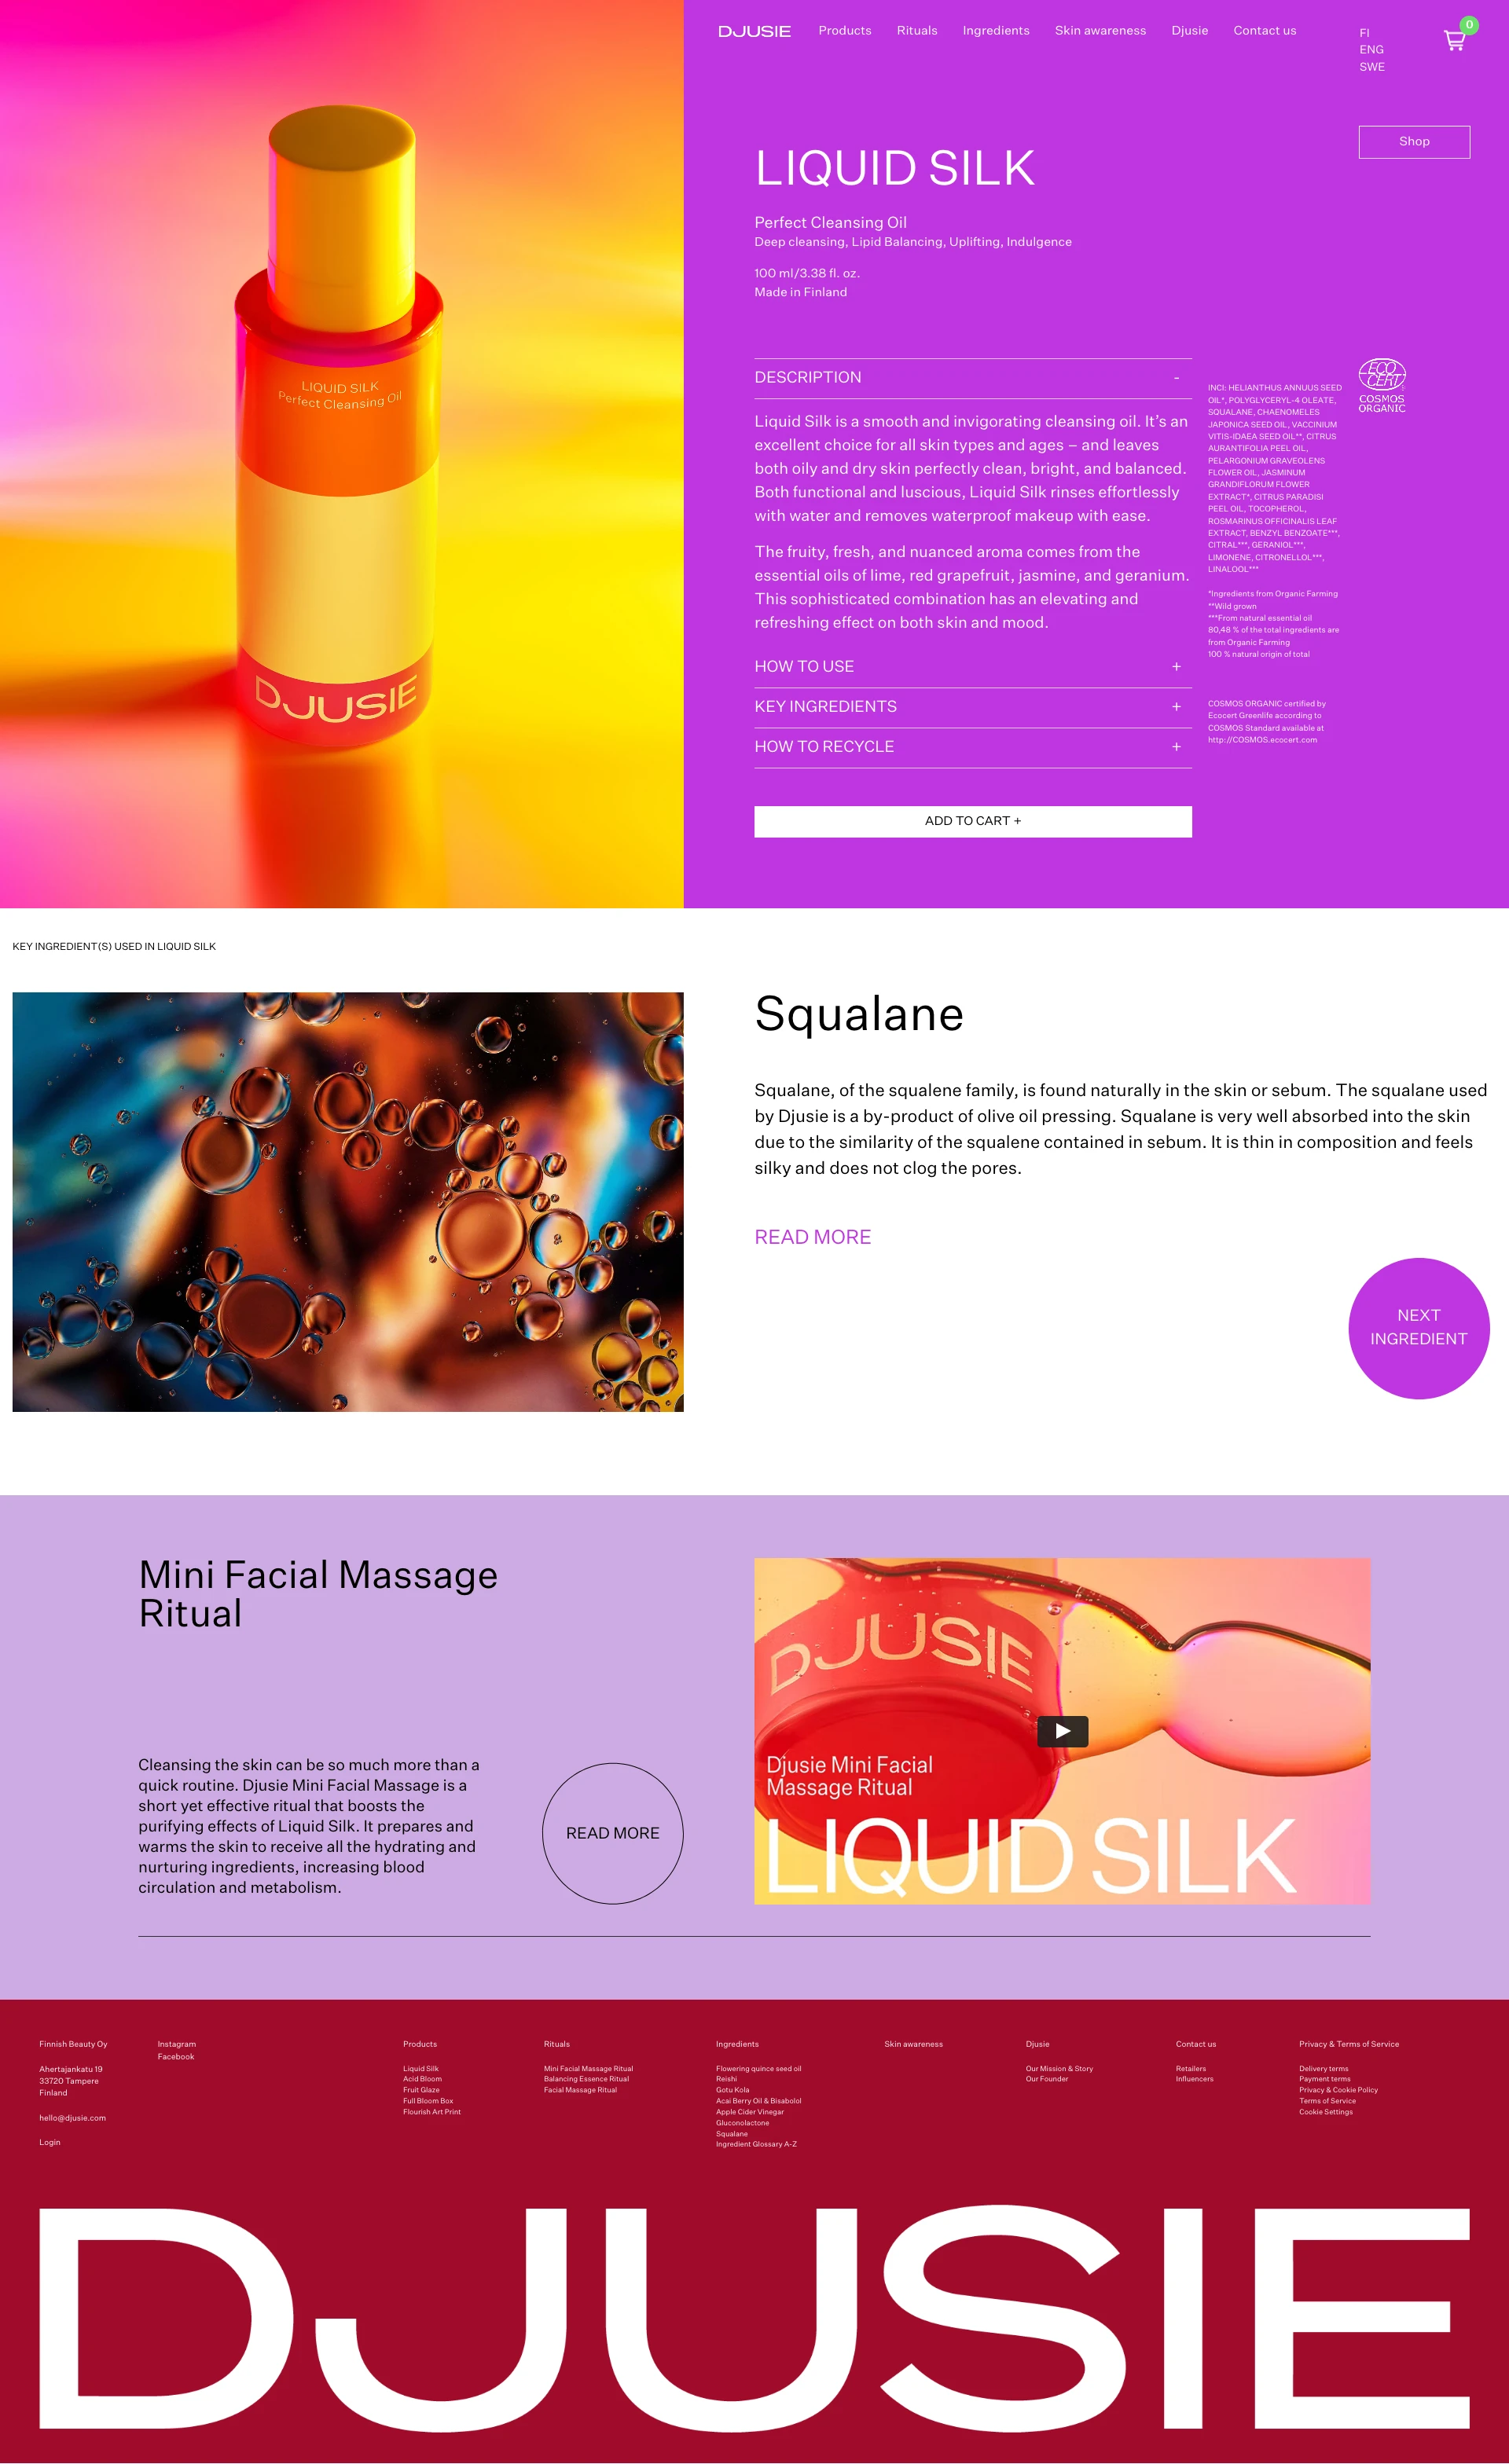 Djusie Landing Page Example: Djusie is a visionary F-Beauty brand offering a high-quality range of natural skincare products certified by Ecocert.